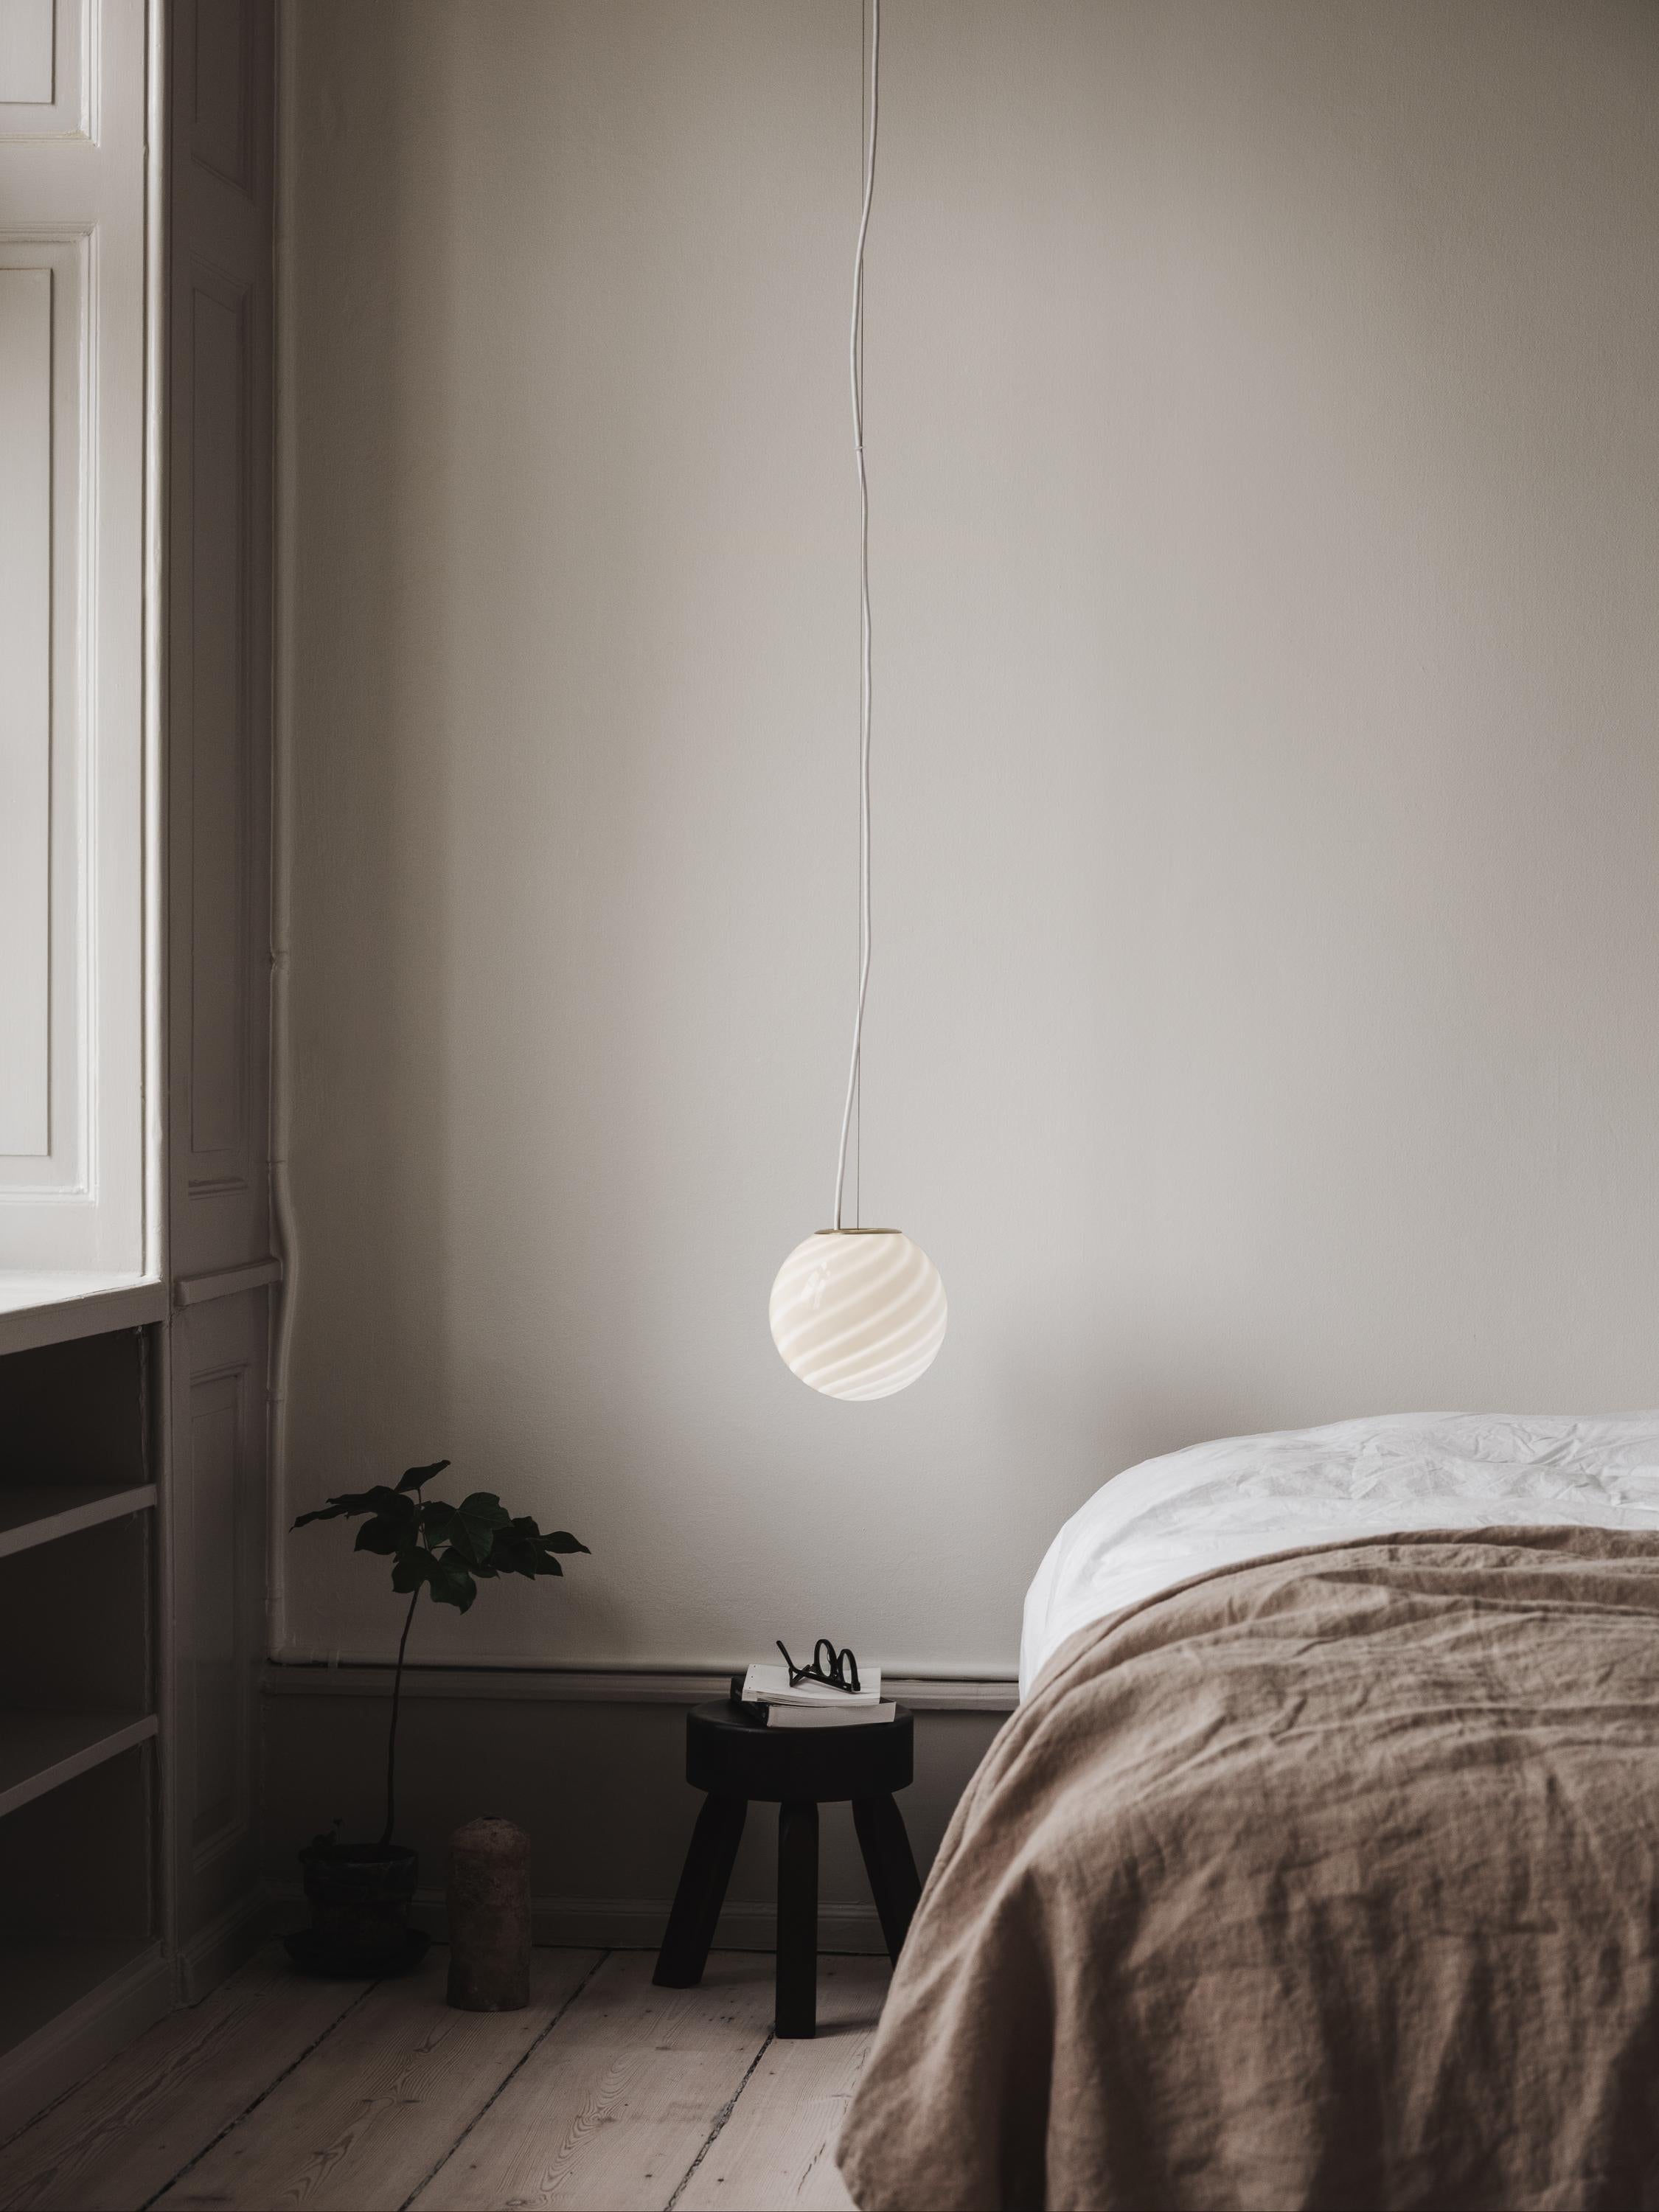 Sphere-shaped pendant ceiling lamp crafted from mouth-blown opaline glass. The design features a swirl pattern obtained using an original 1970s mould, specifically picked to give the lamp a clean expression. The piece includes a hand-casted fitting